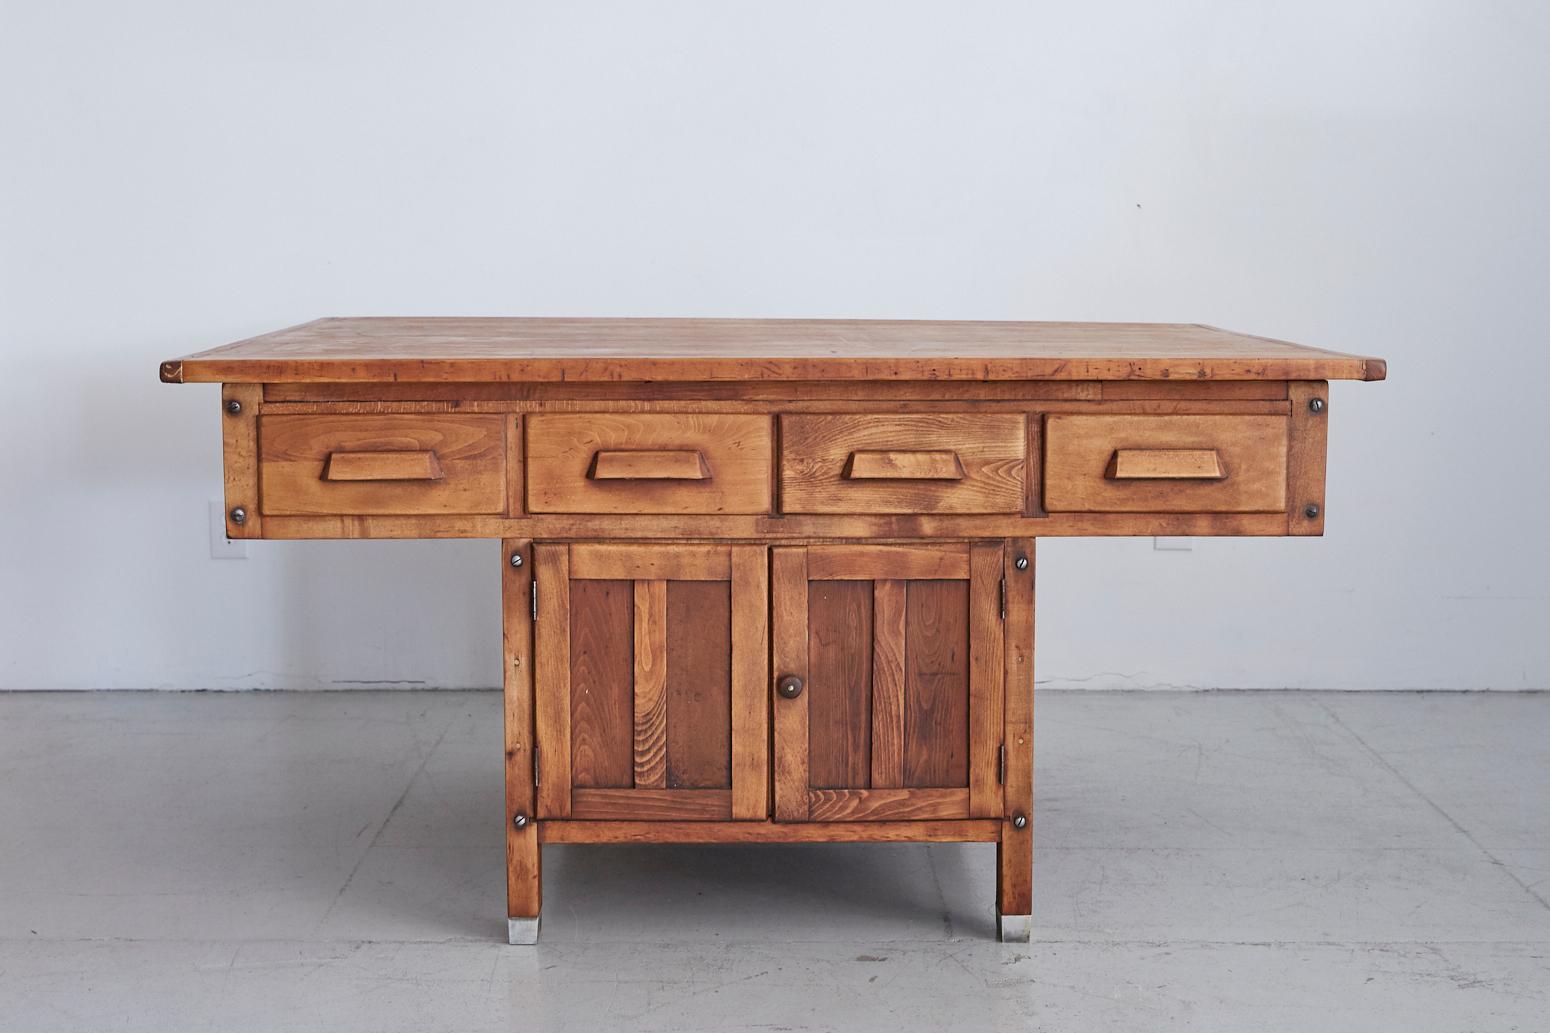 Great two-sided antique oak work table or desk. Large top surface with nice wear and patina throughout and four drawers on each side. Large base with doors enclosing open storage, also on both sides. Metal cap feet. Would make be a great communal